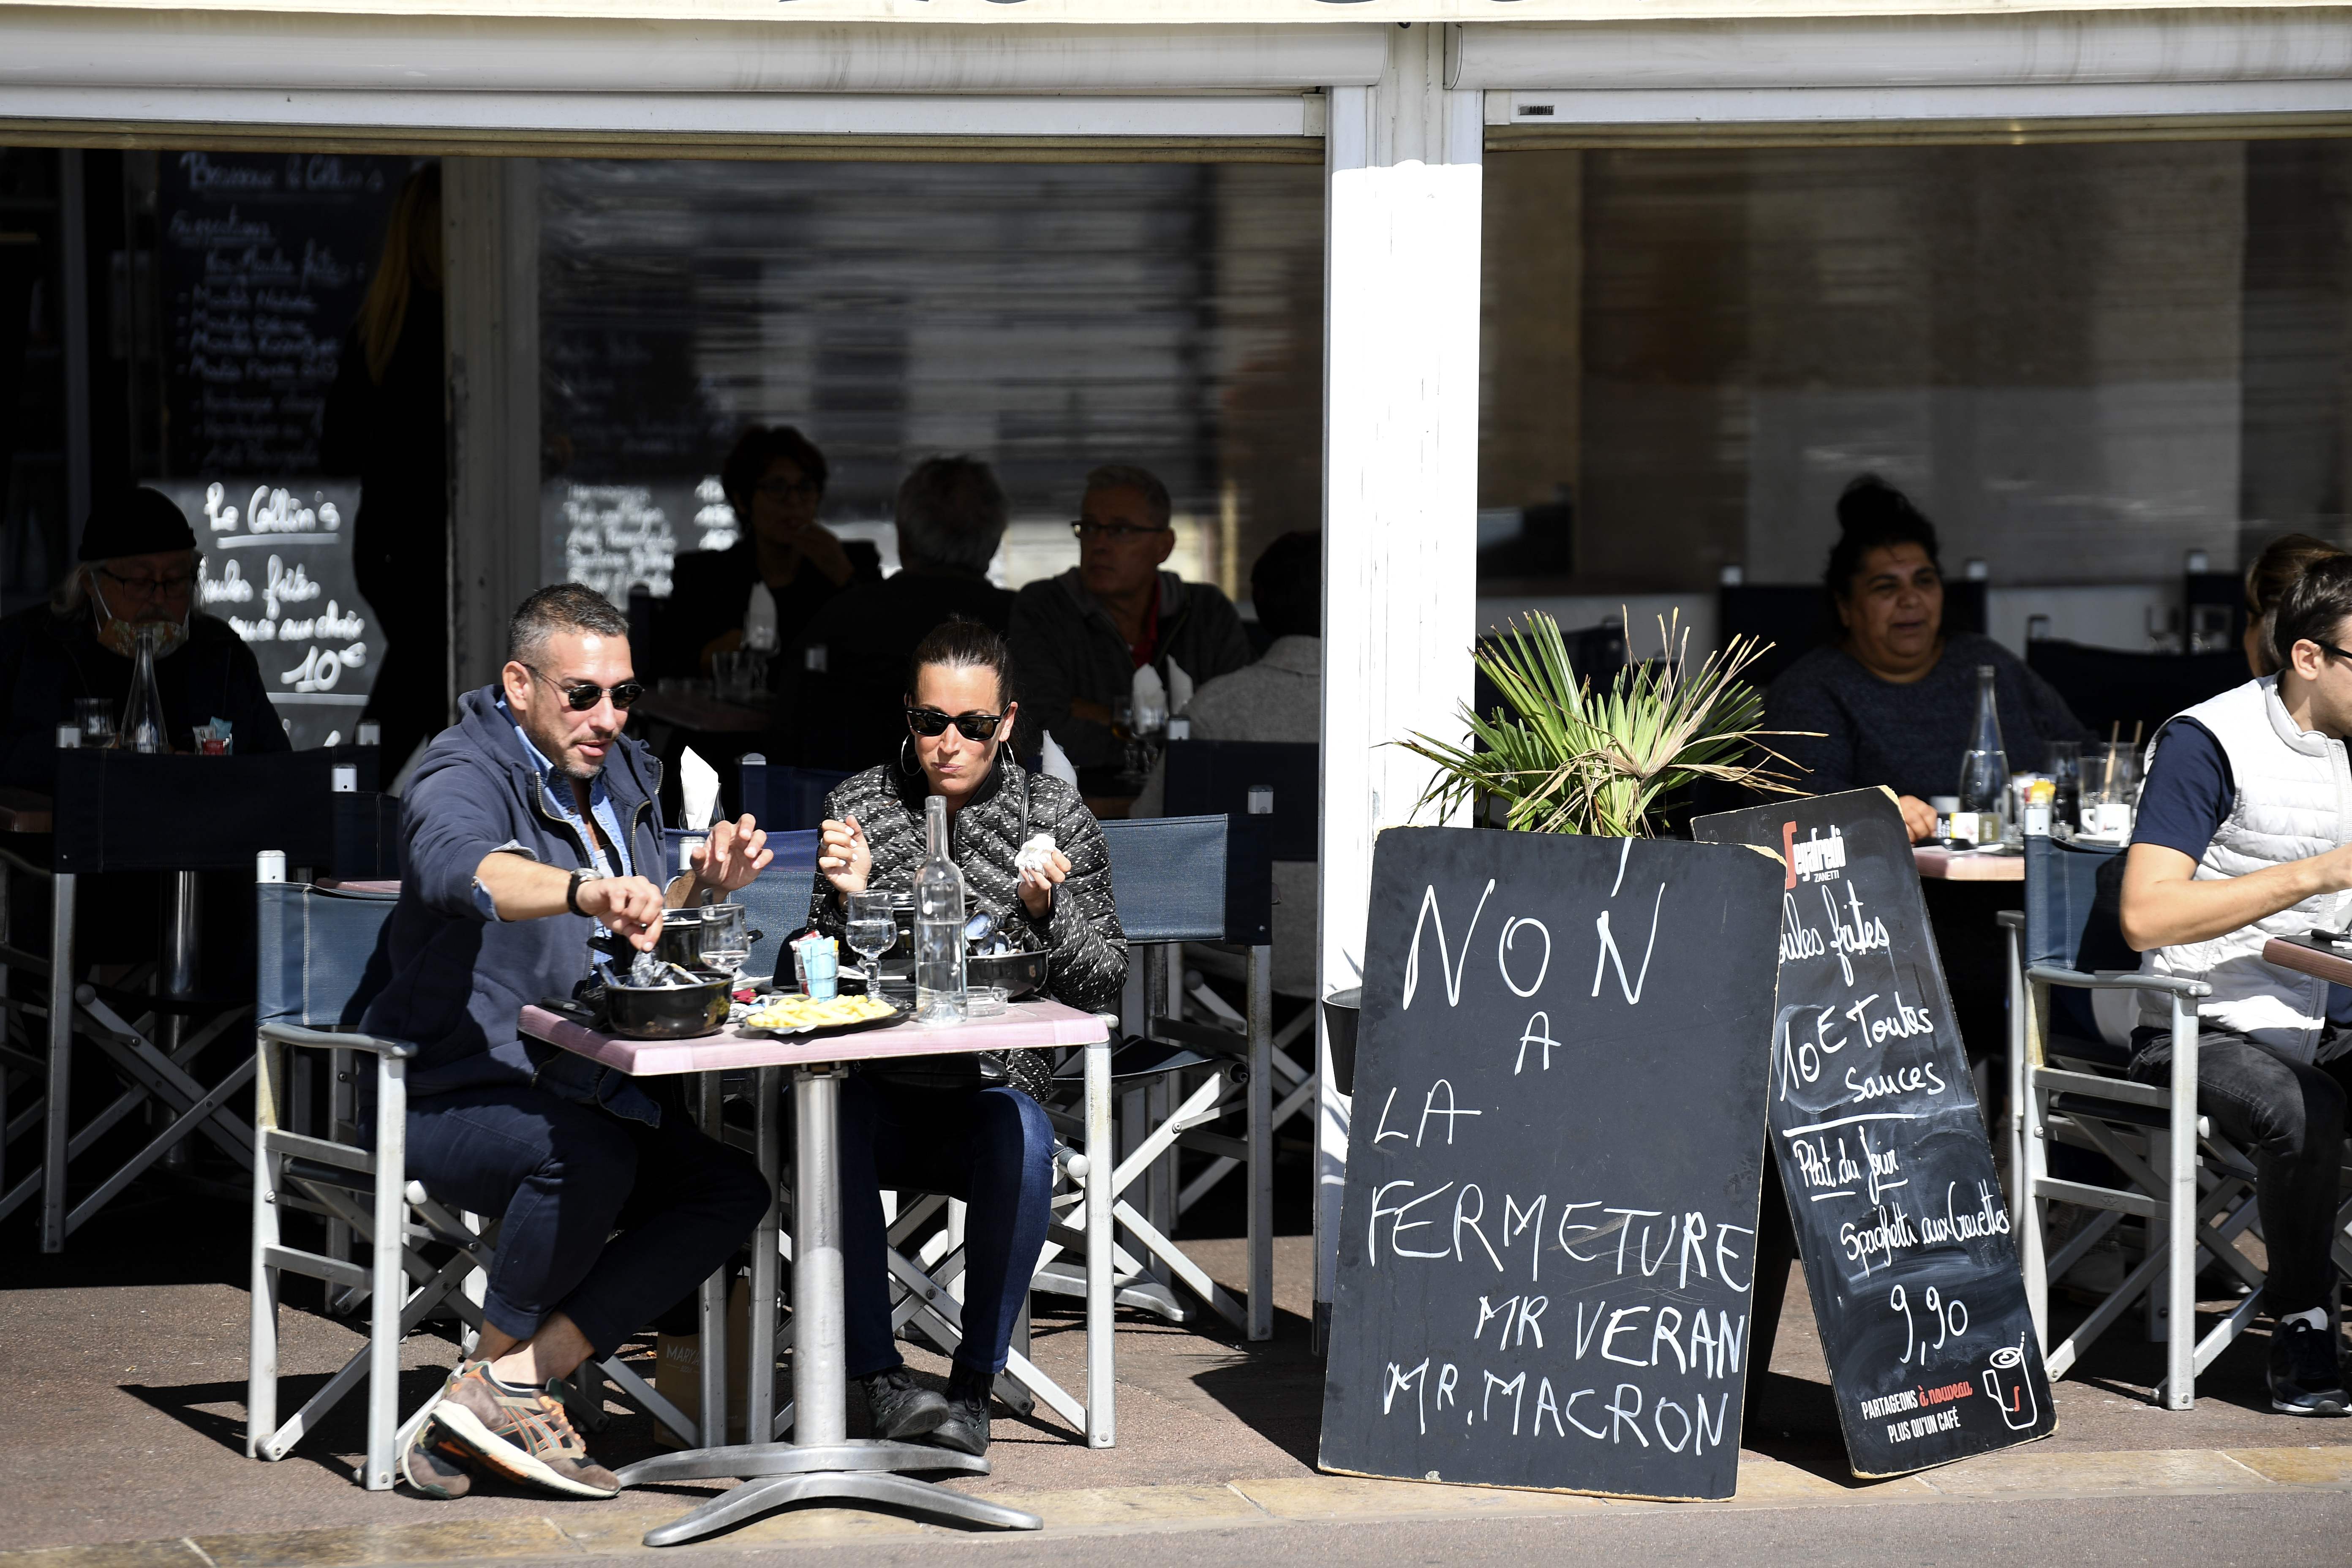 A couple have lunch in Marseille next to a sign reading ‘No to the shutdown, Mr Macron’